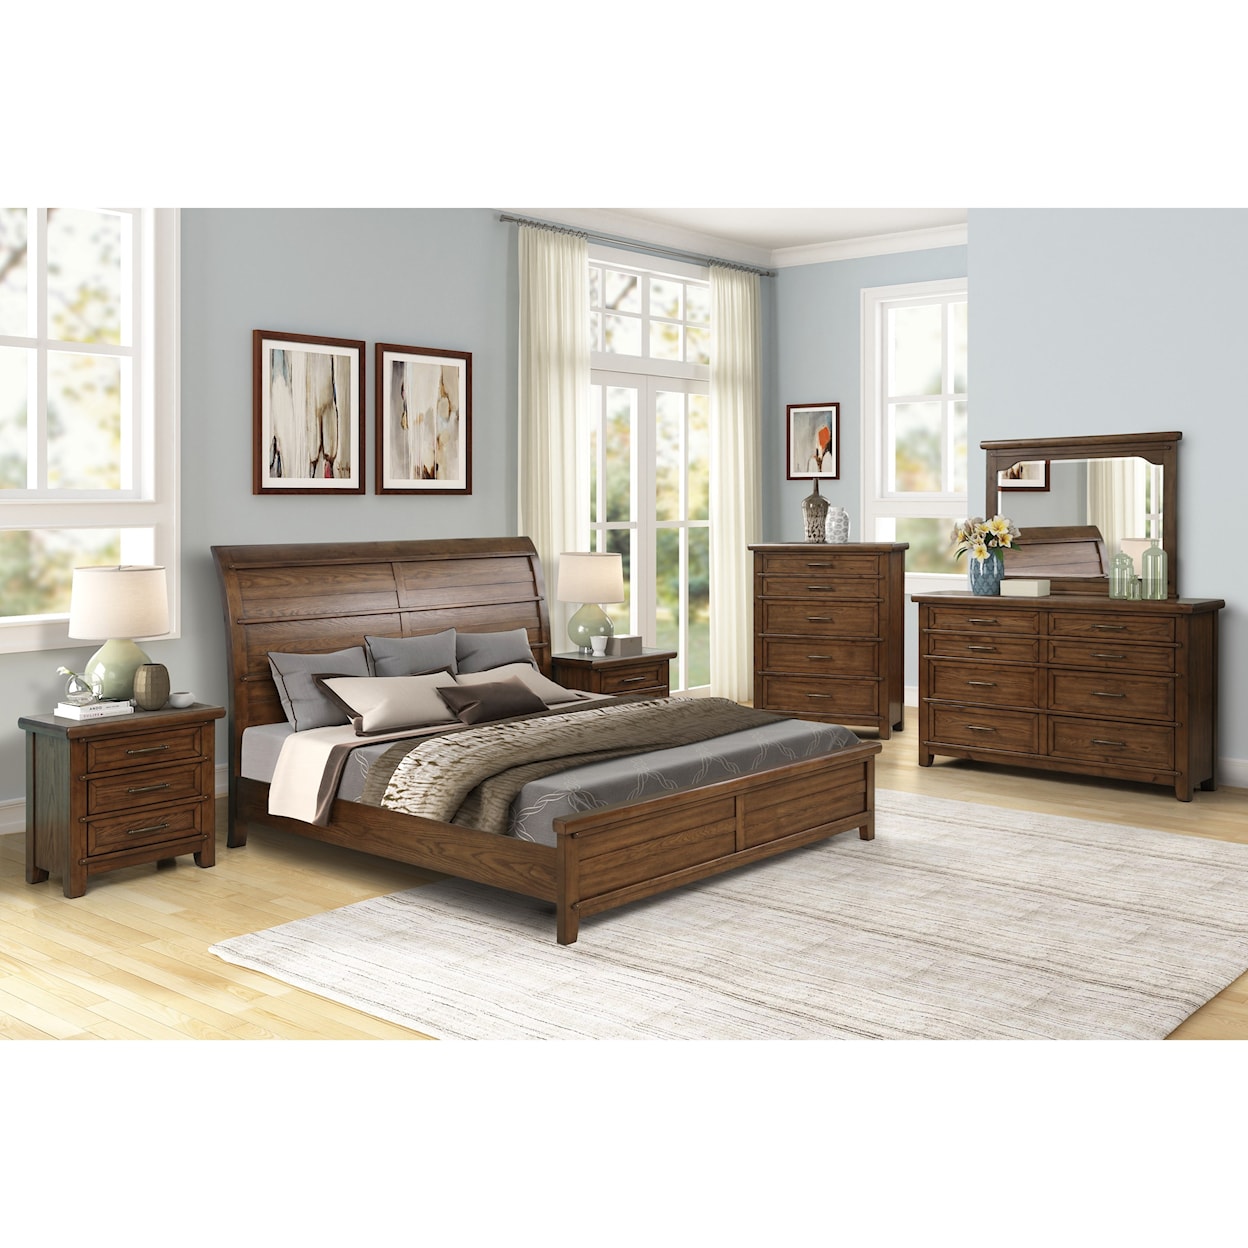 New Classic Fairfax County Queen Sleigh Bed